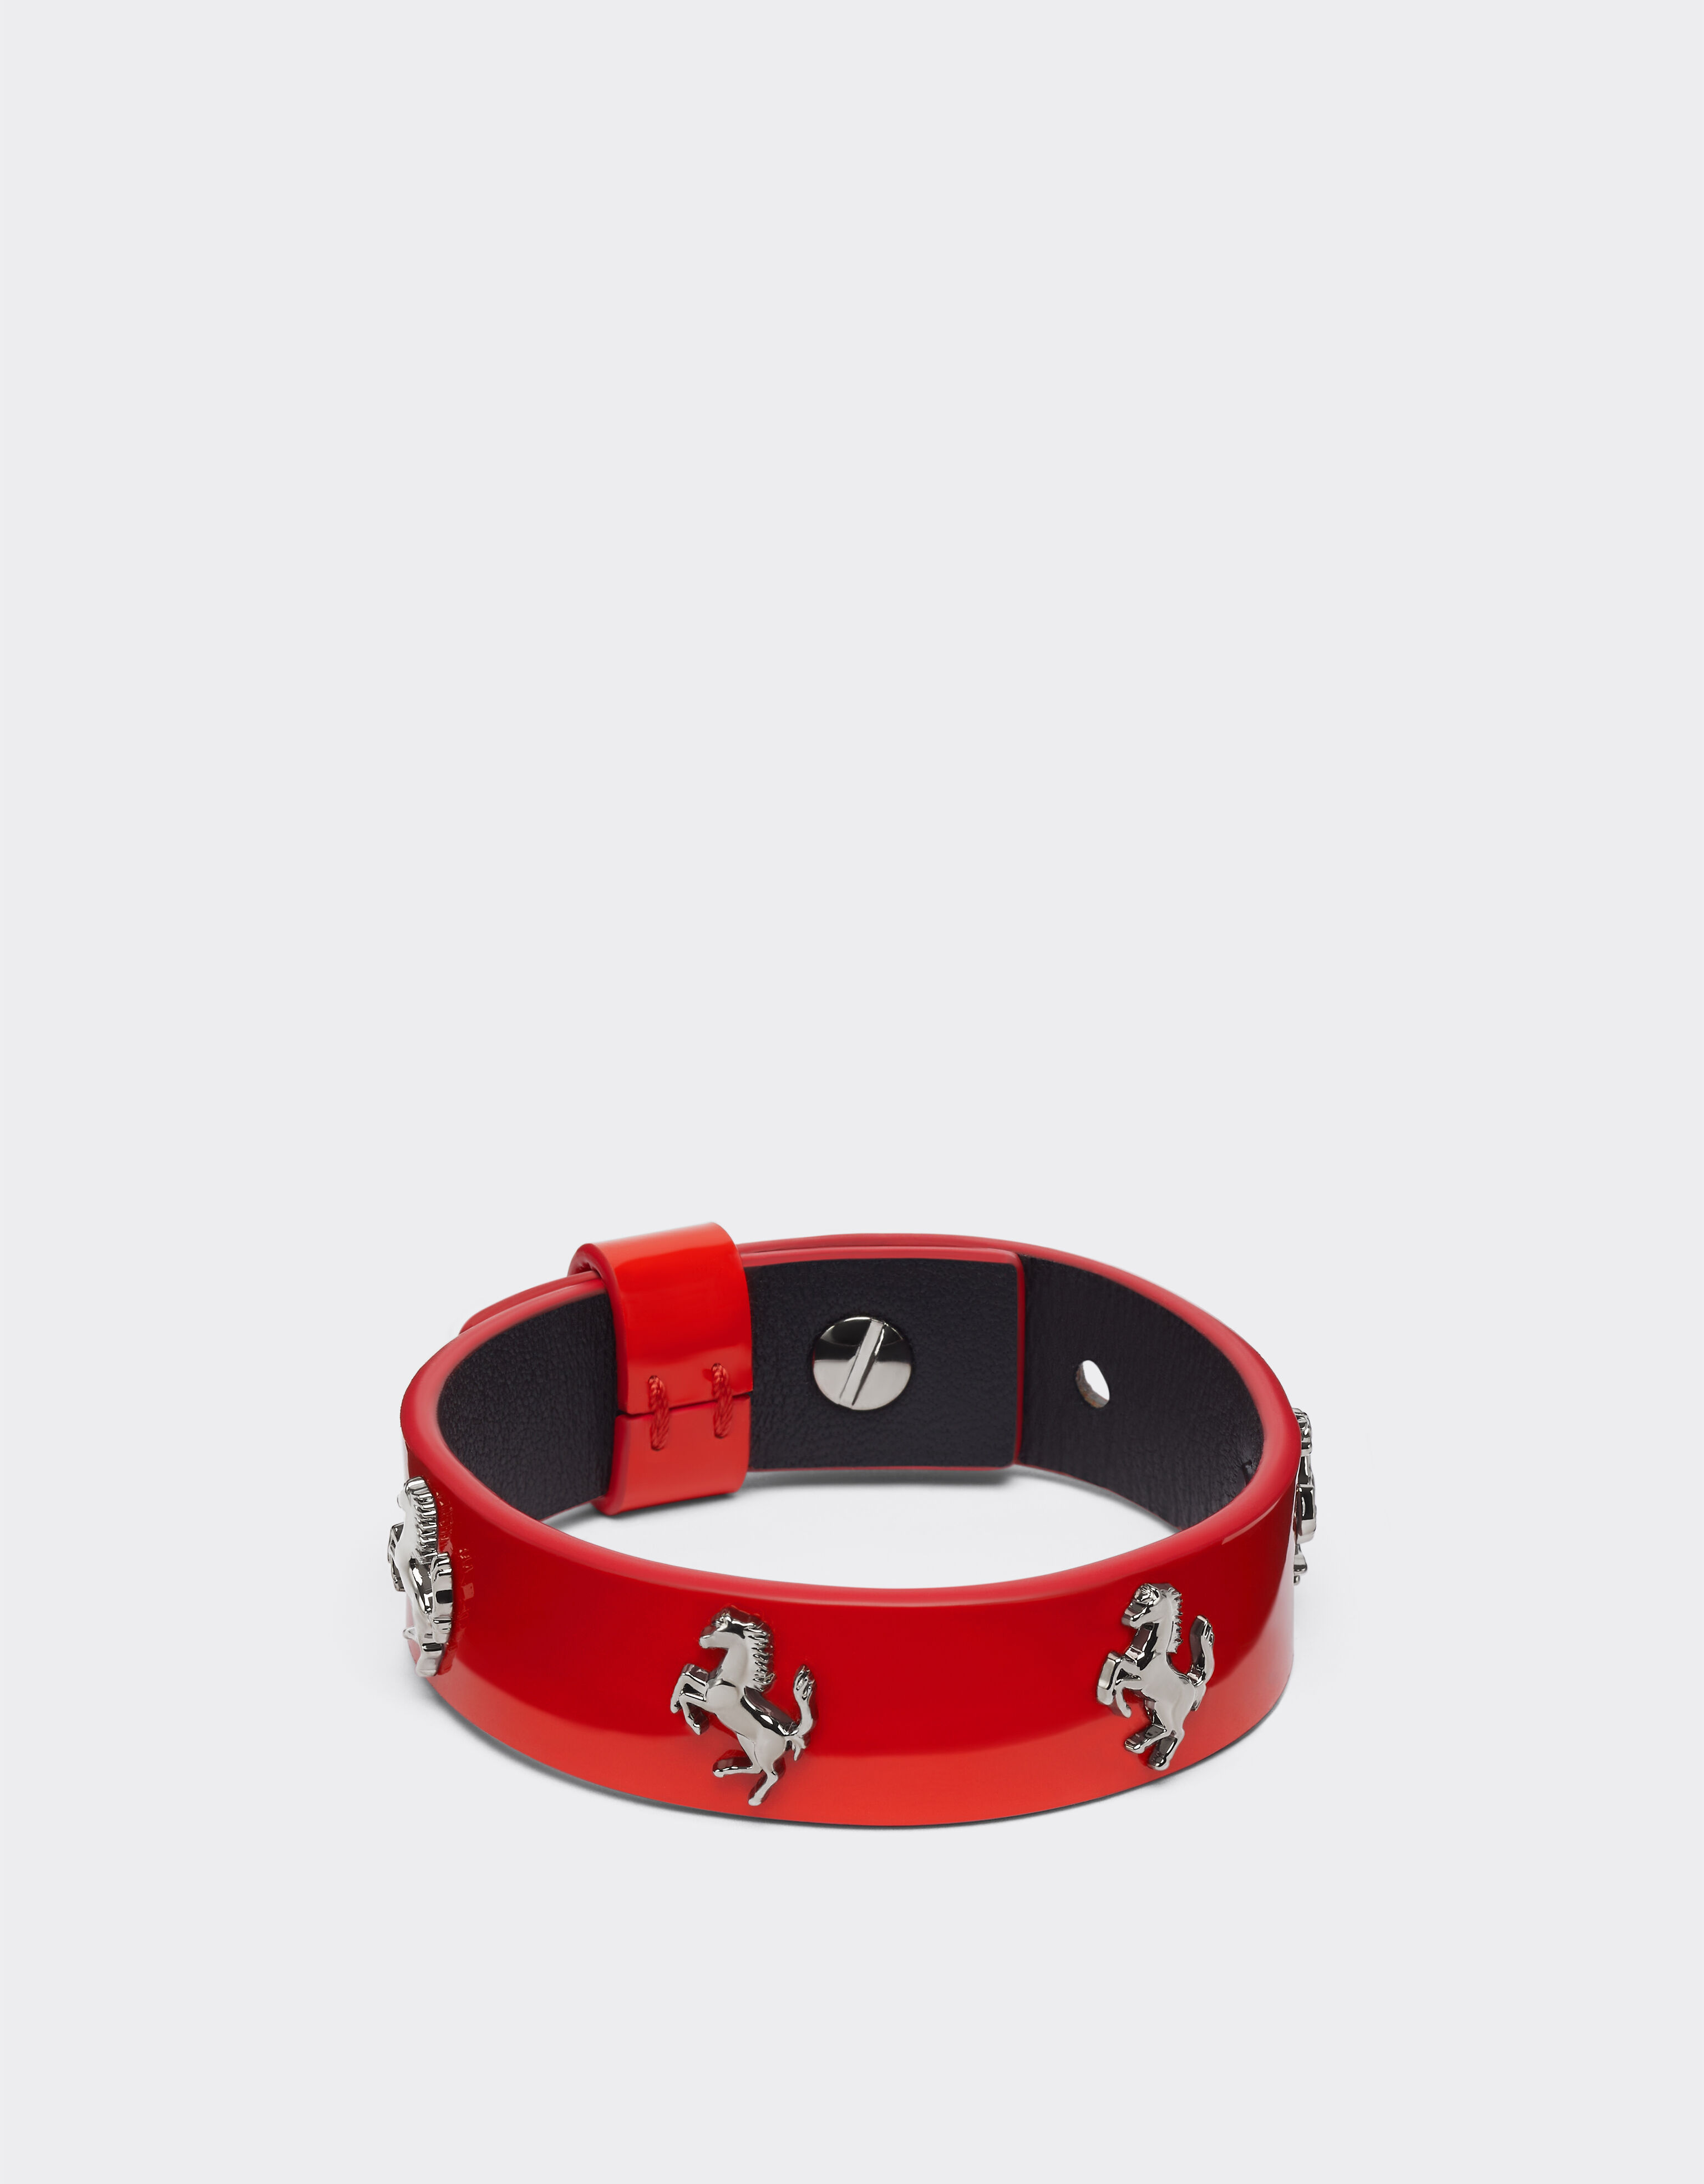 Ferrari Bracelet in red patent leather with studs Charcoal 20010f